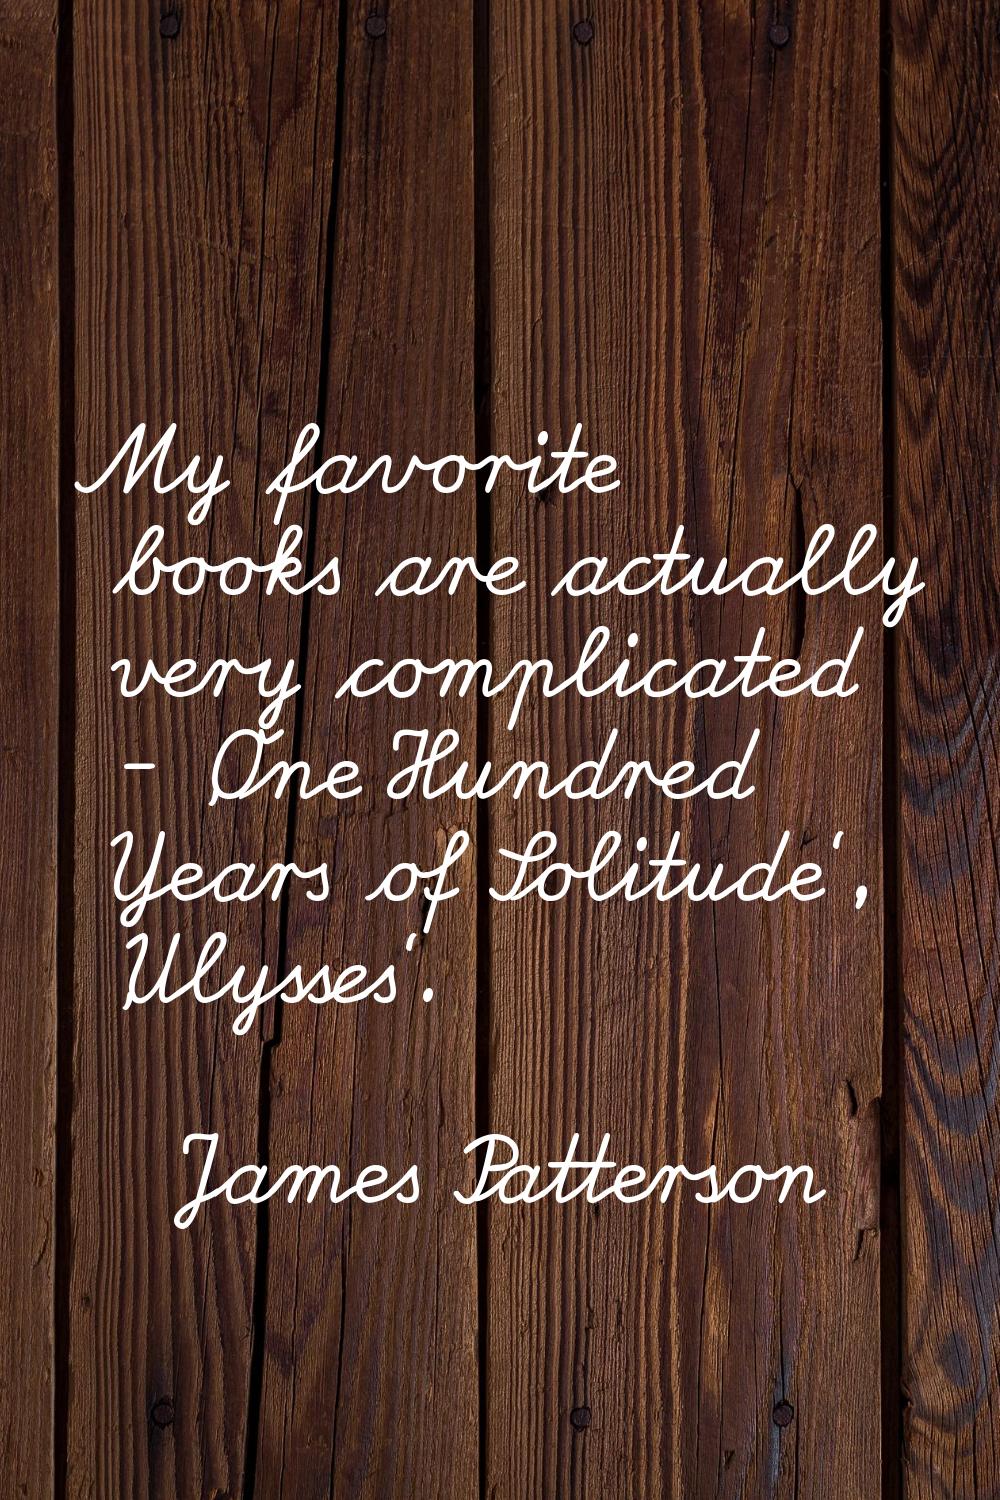 My favorite books are actually very complicated - 'One Hundred Years of Solitude', 'Ulysses'.